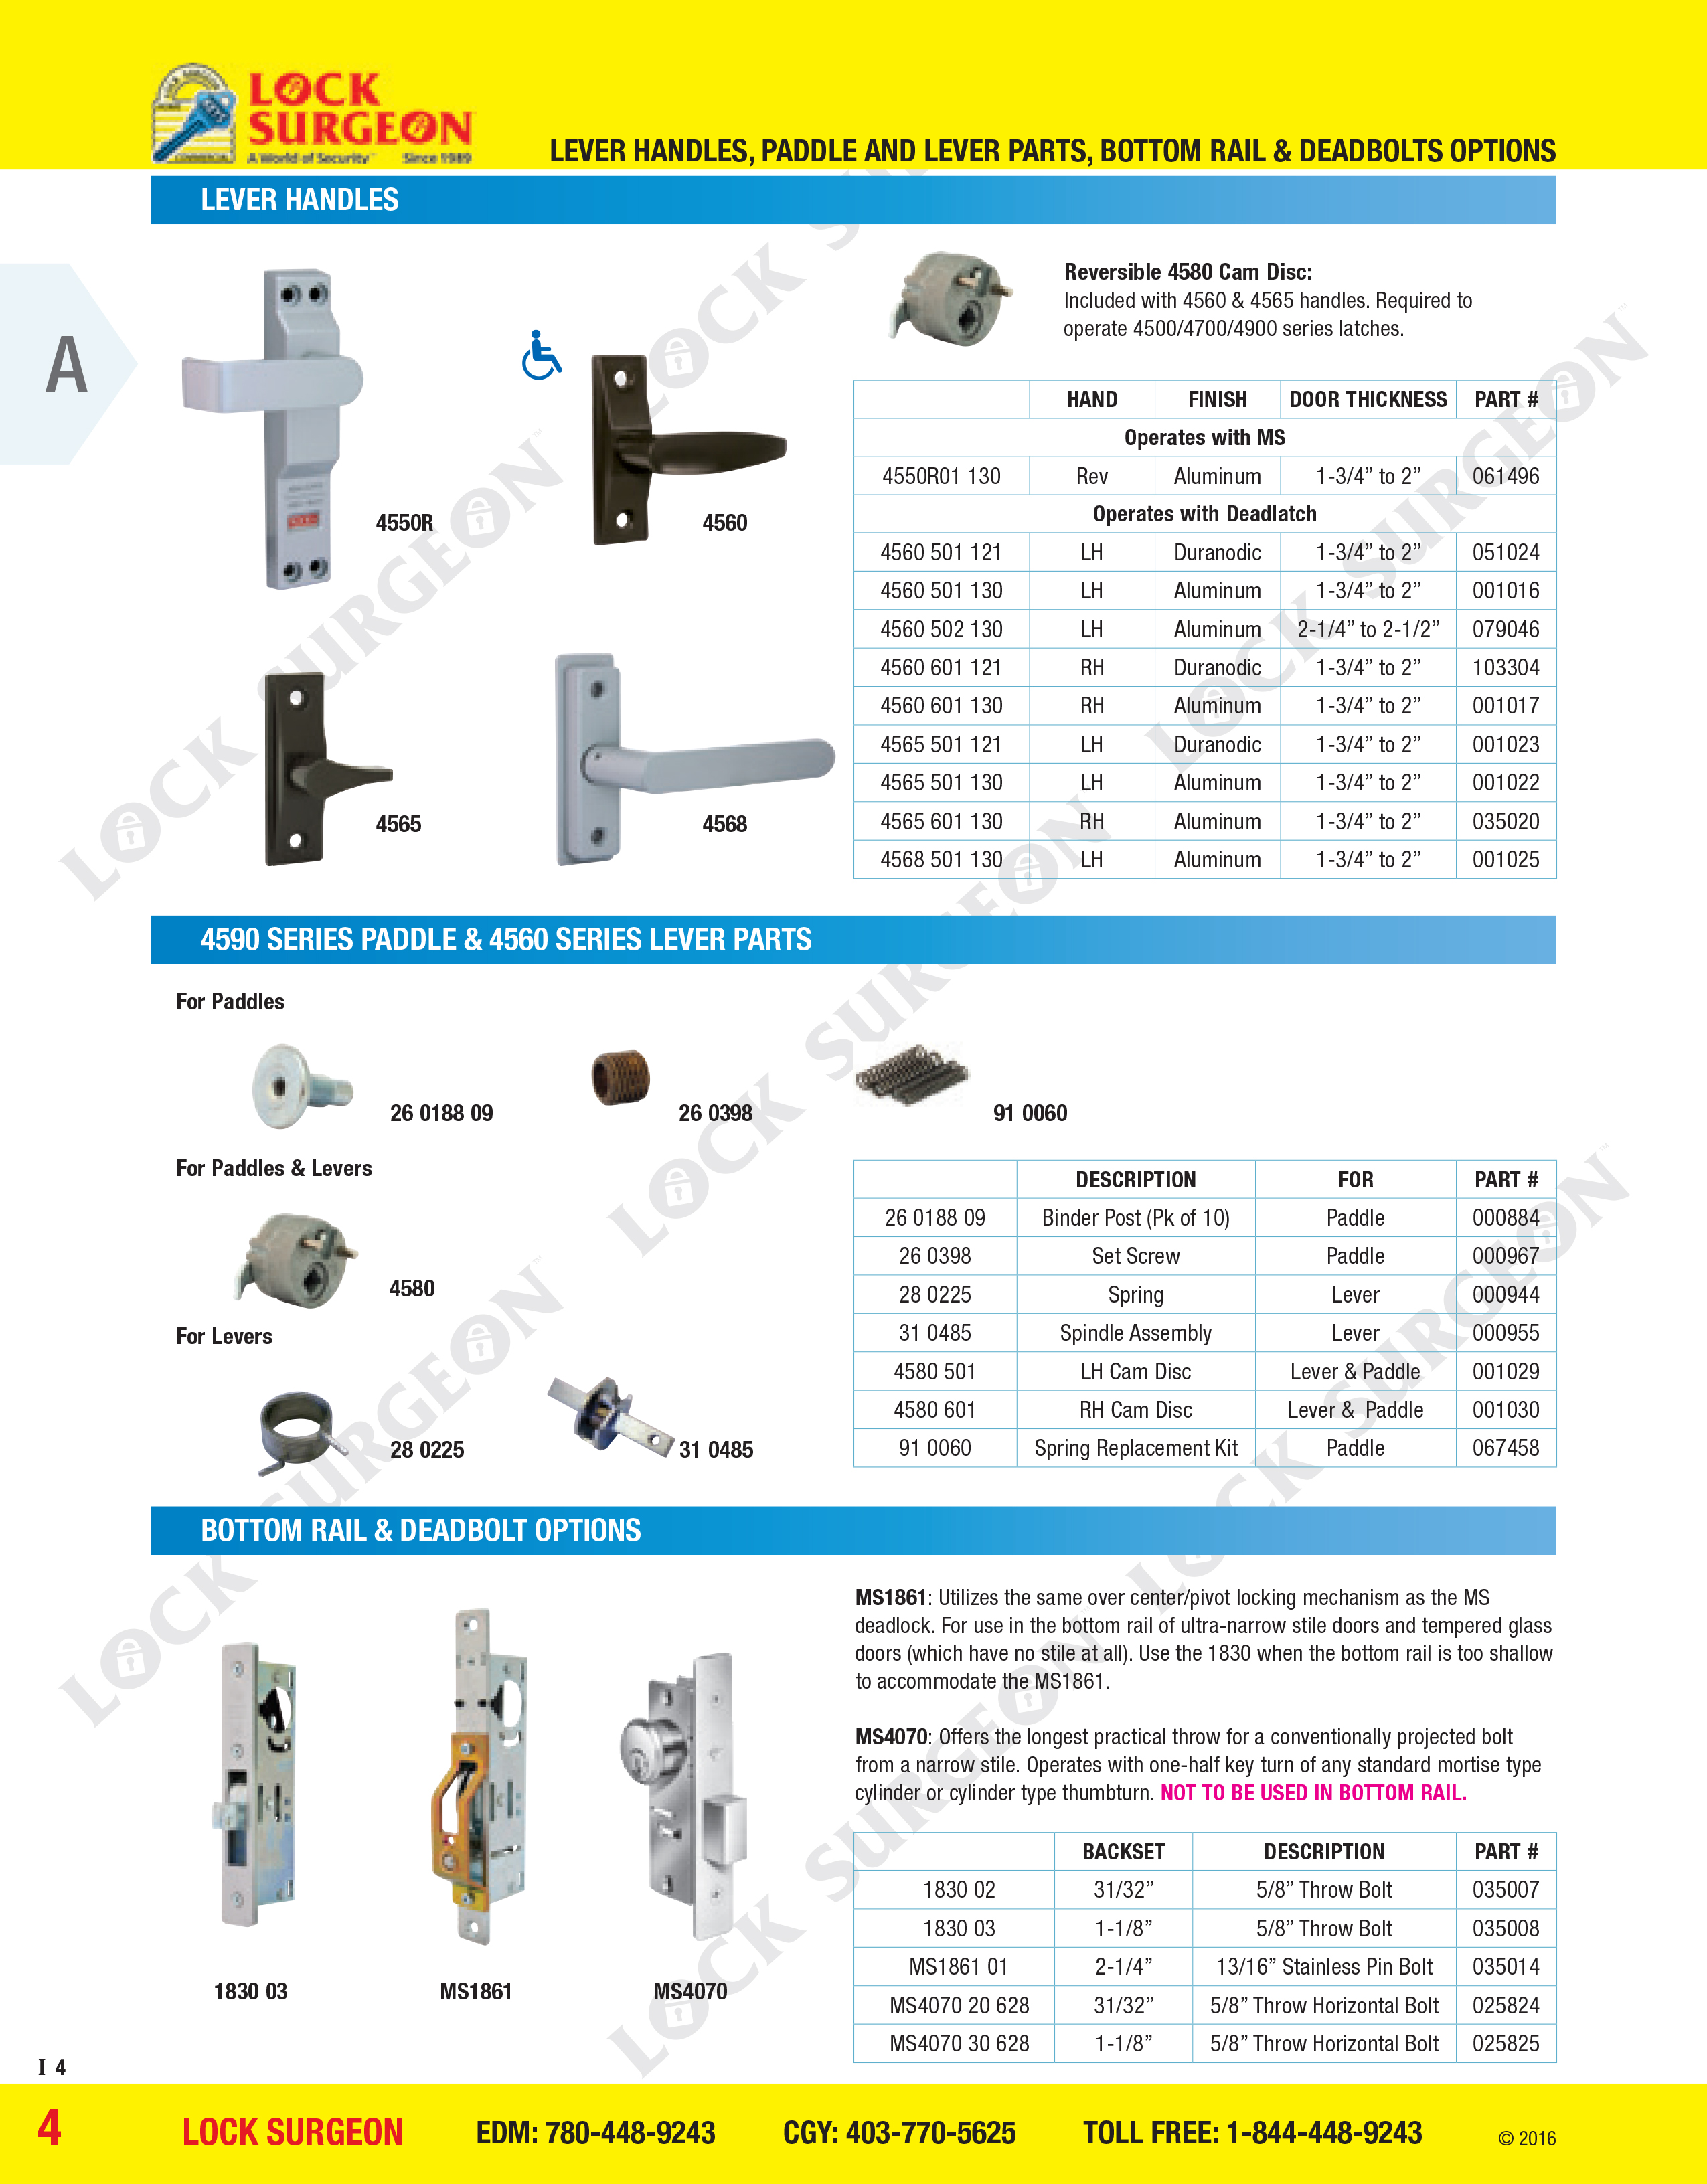 Lever handles, 4590 Series paddle and 4560 Series lever parts, bottom rail and deadbolt options